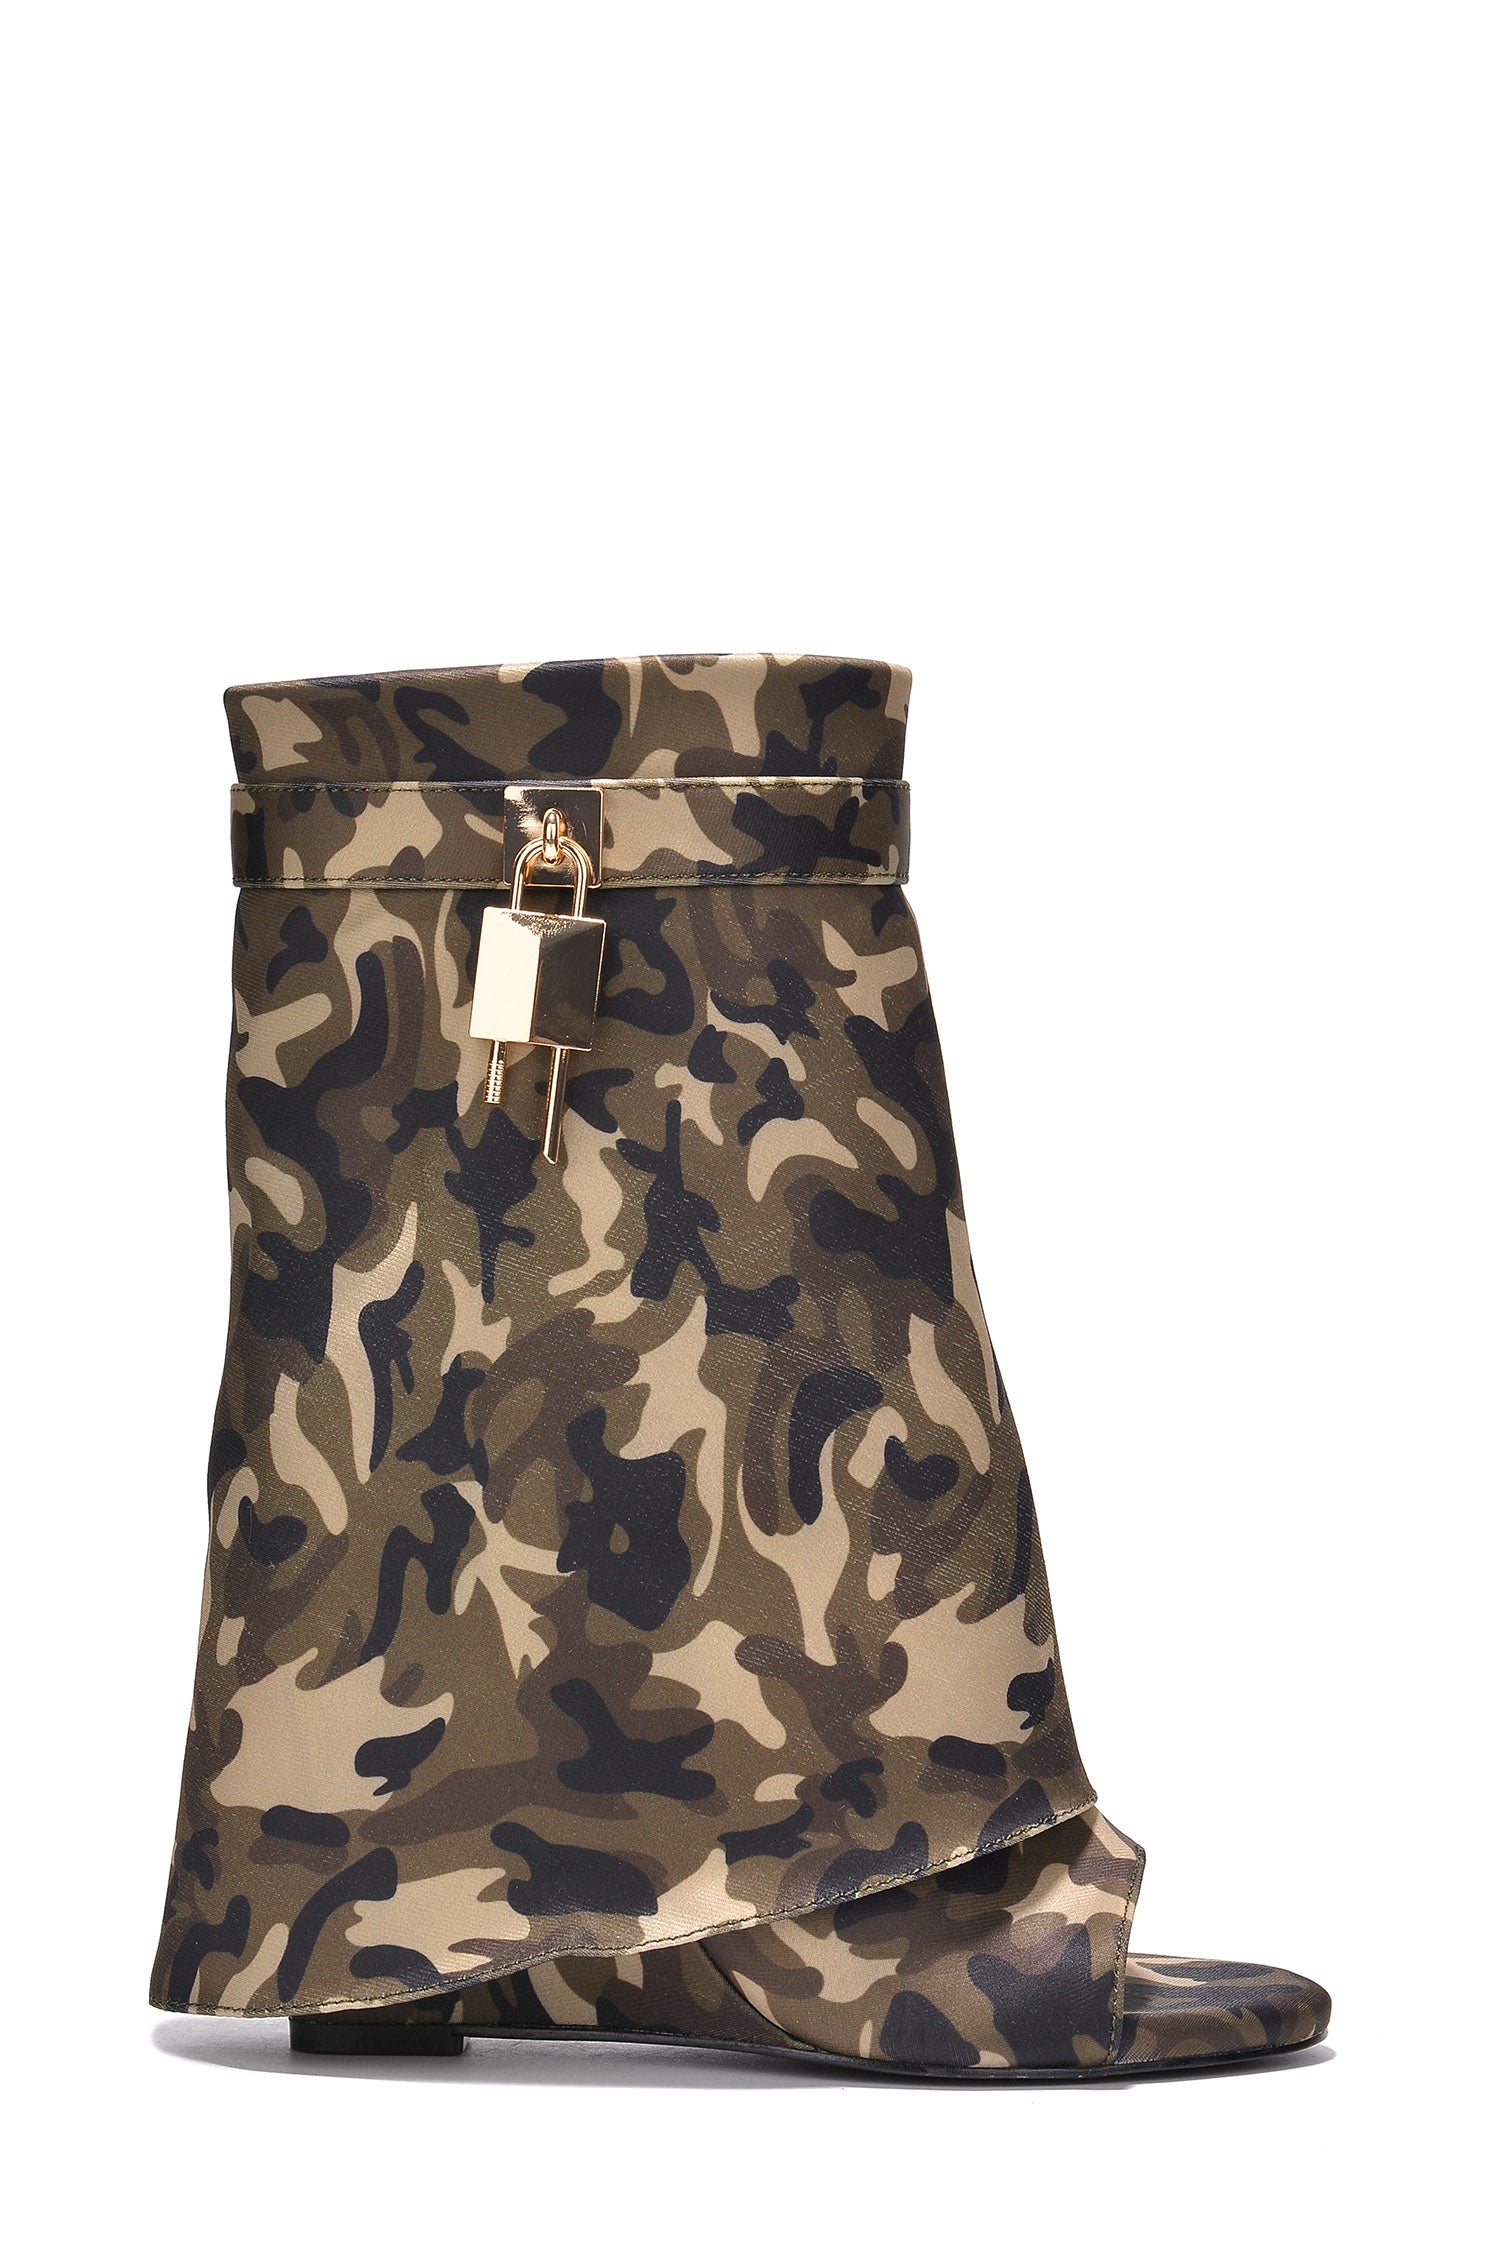 Cape Robbin - BETTERBABE - CAMOUFLAGE - BOOTS